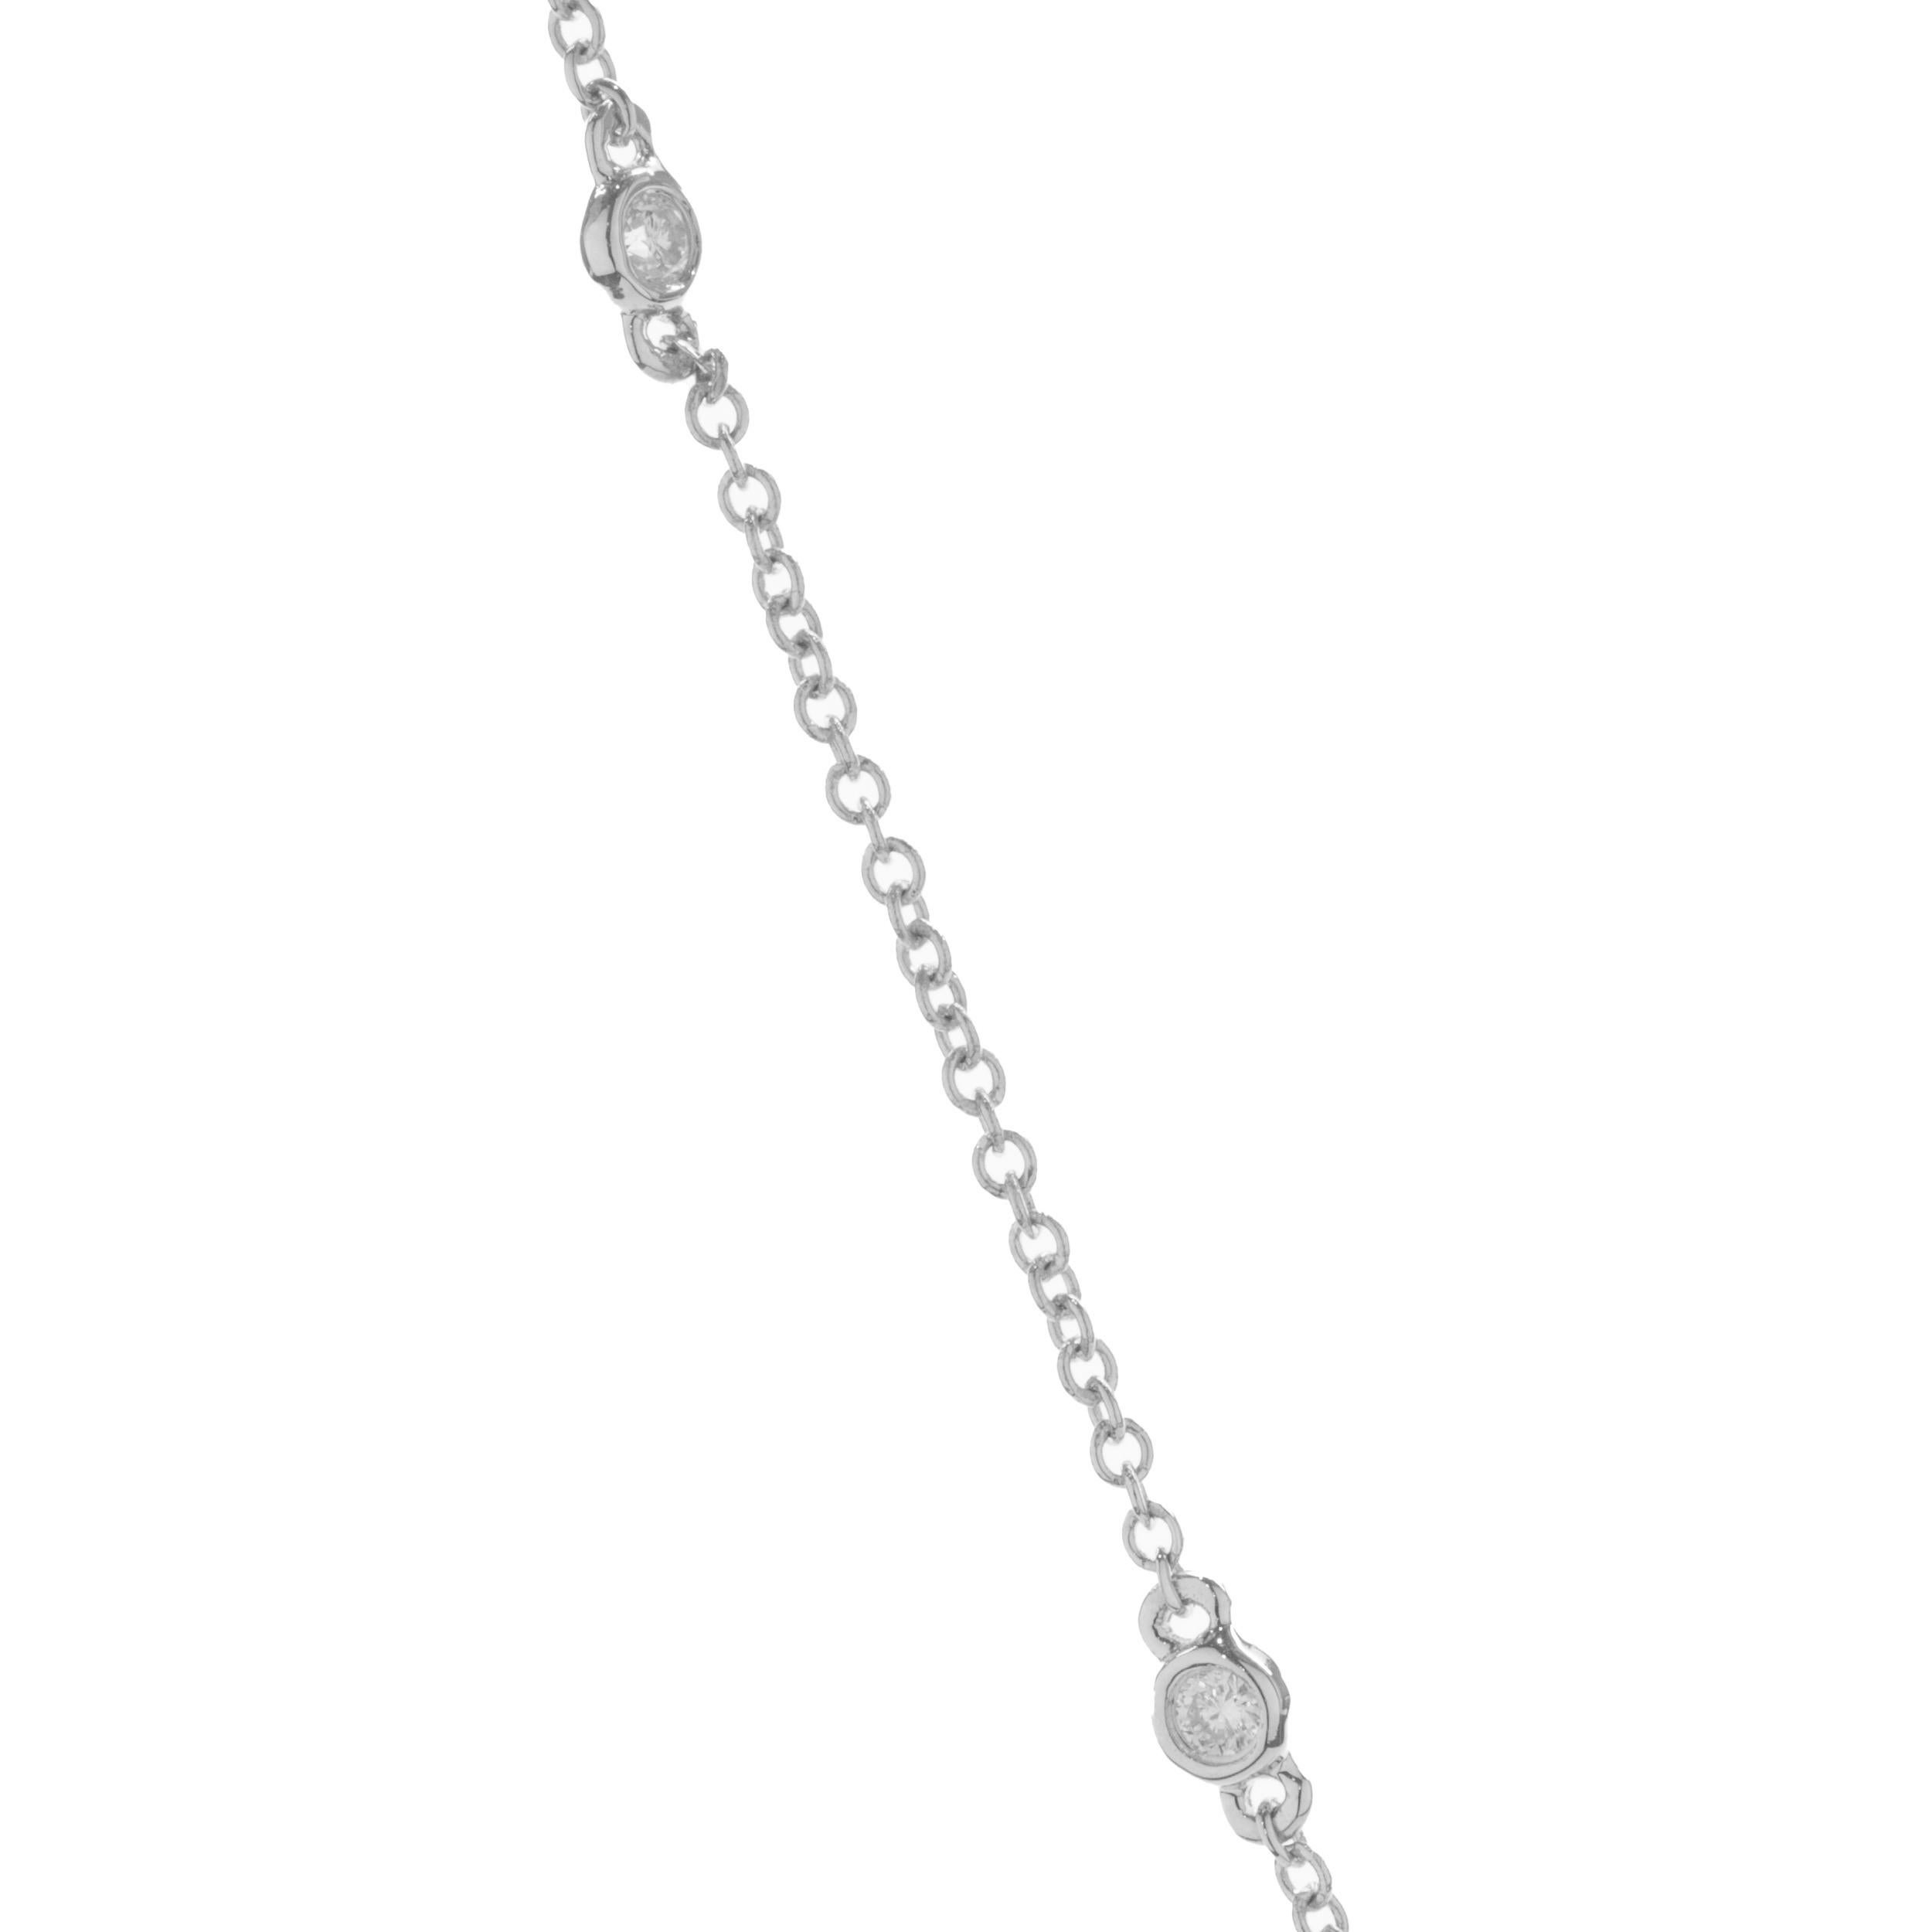 Designer: custom design
Material: 14K white gold
Diamond: 22 round brilliant cut = 0.54cttw
Color: G
Clarity: VS2
Dimensions: necklace measures 18-inches in length 
Weight: 3.02 grams